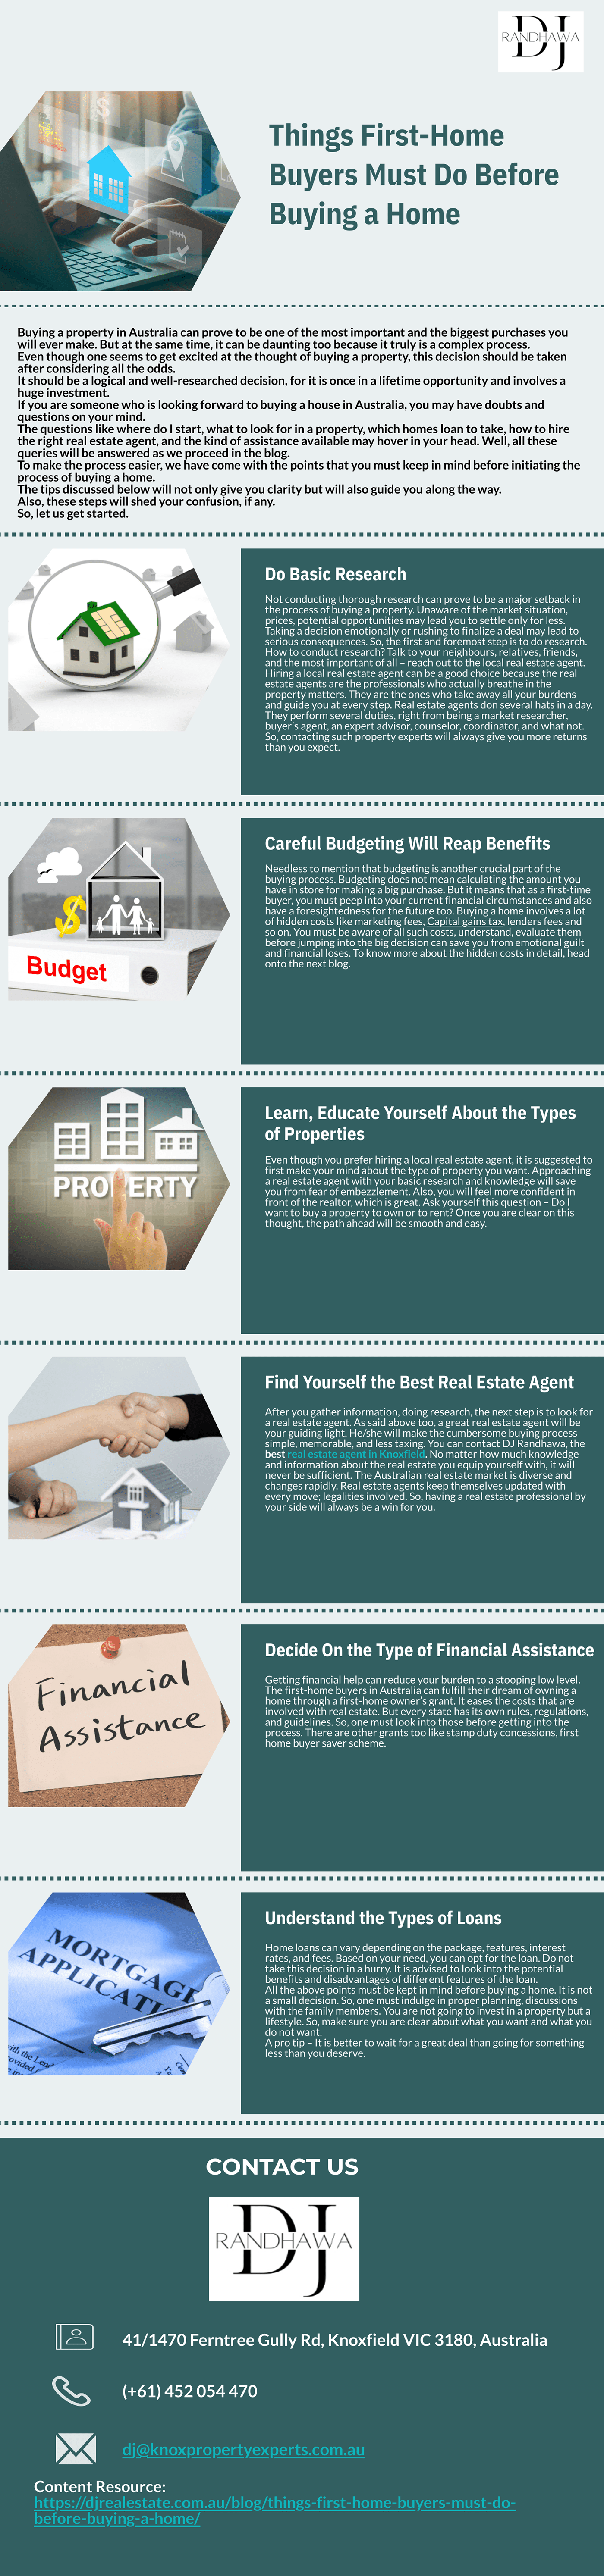 buyers a home buying a property first home buyers Types of Properties